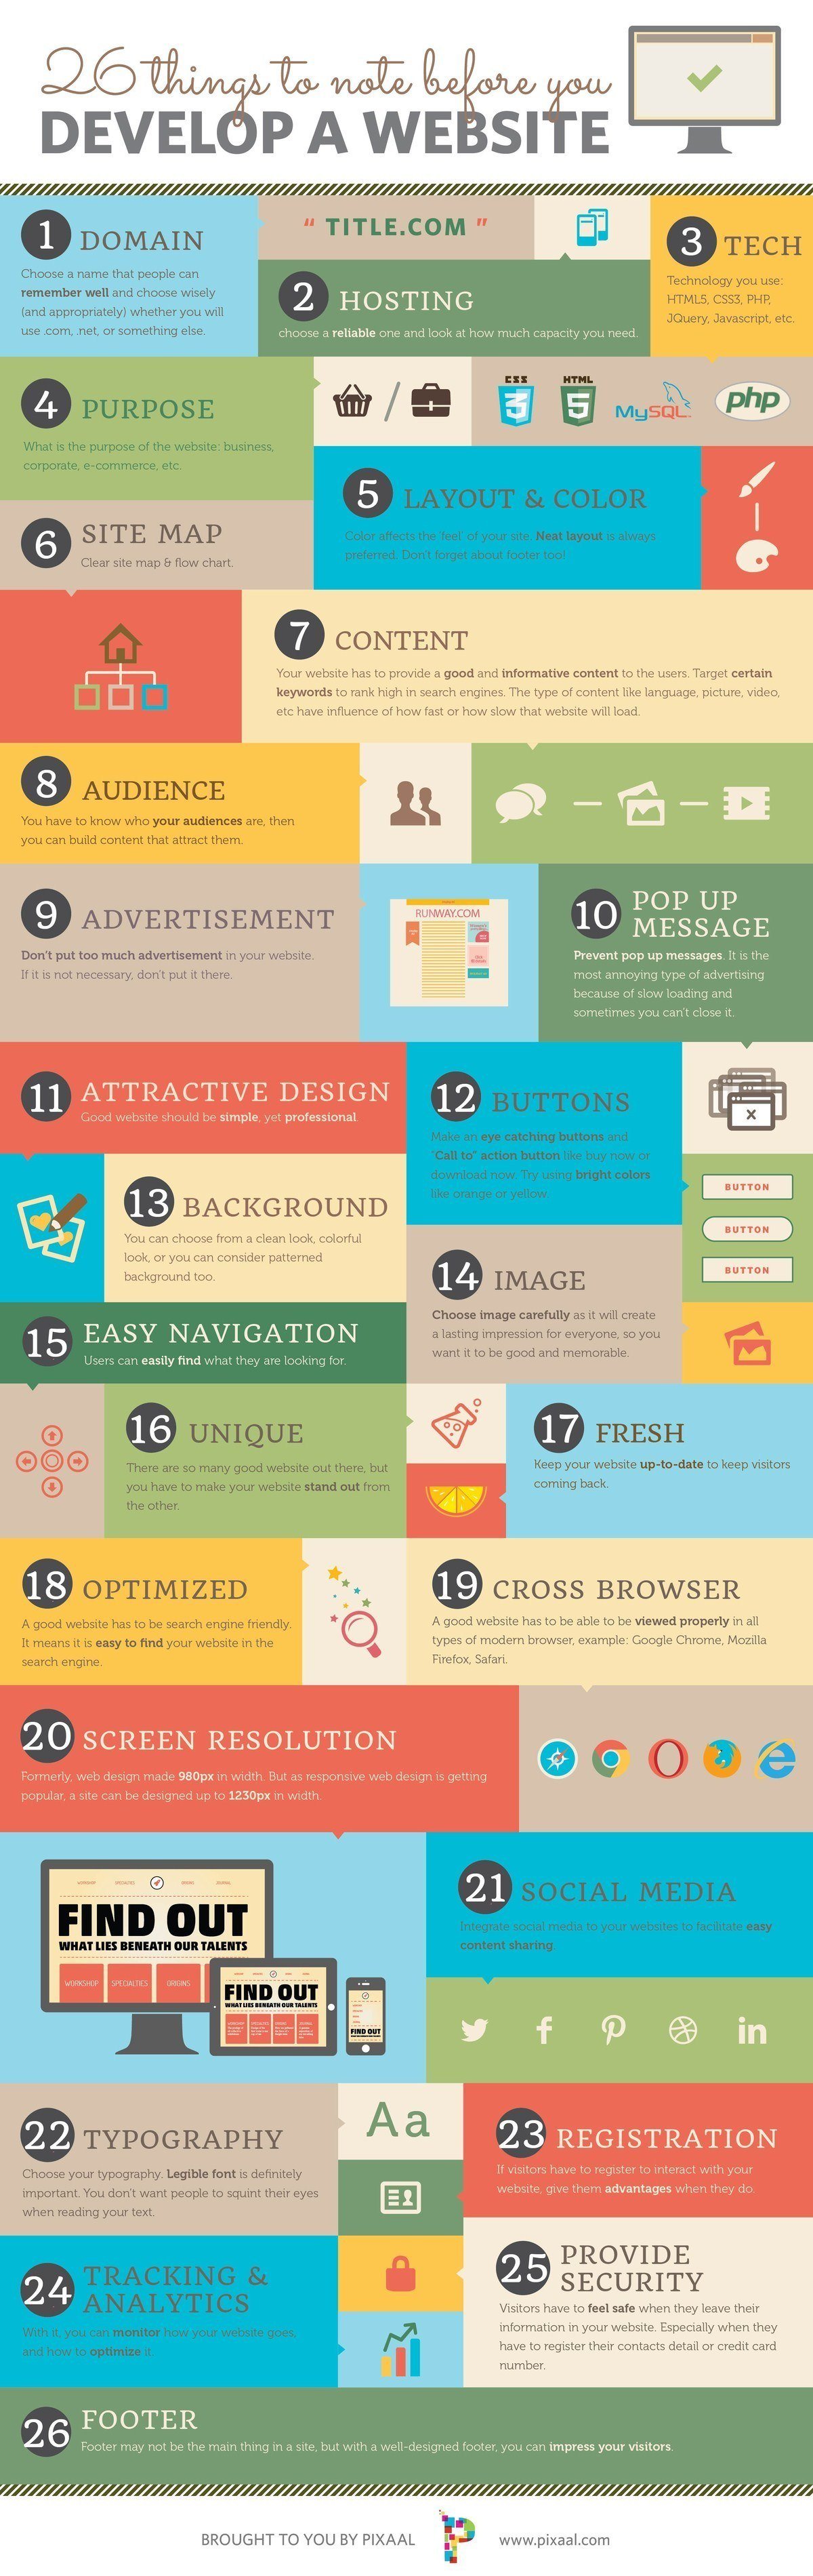 26 Things to Note Before You Develop a Website &#8211; Infographic